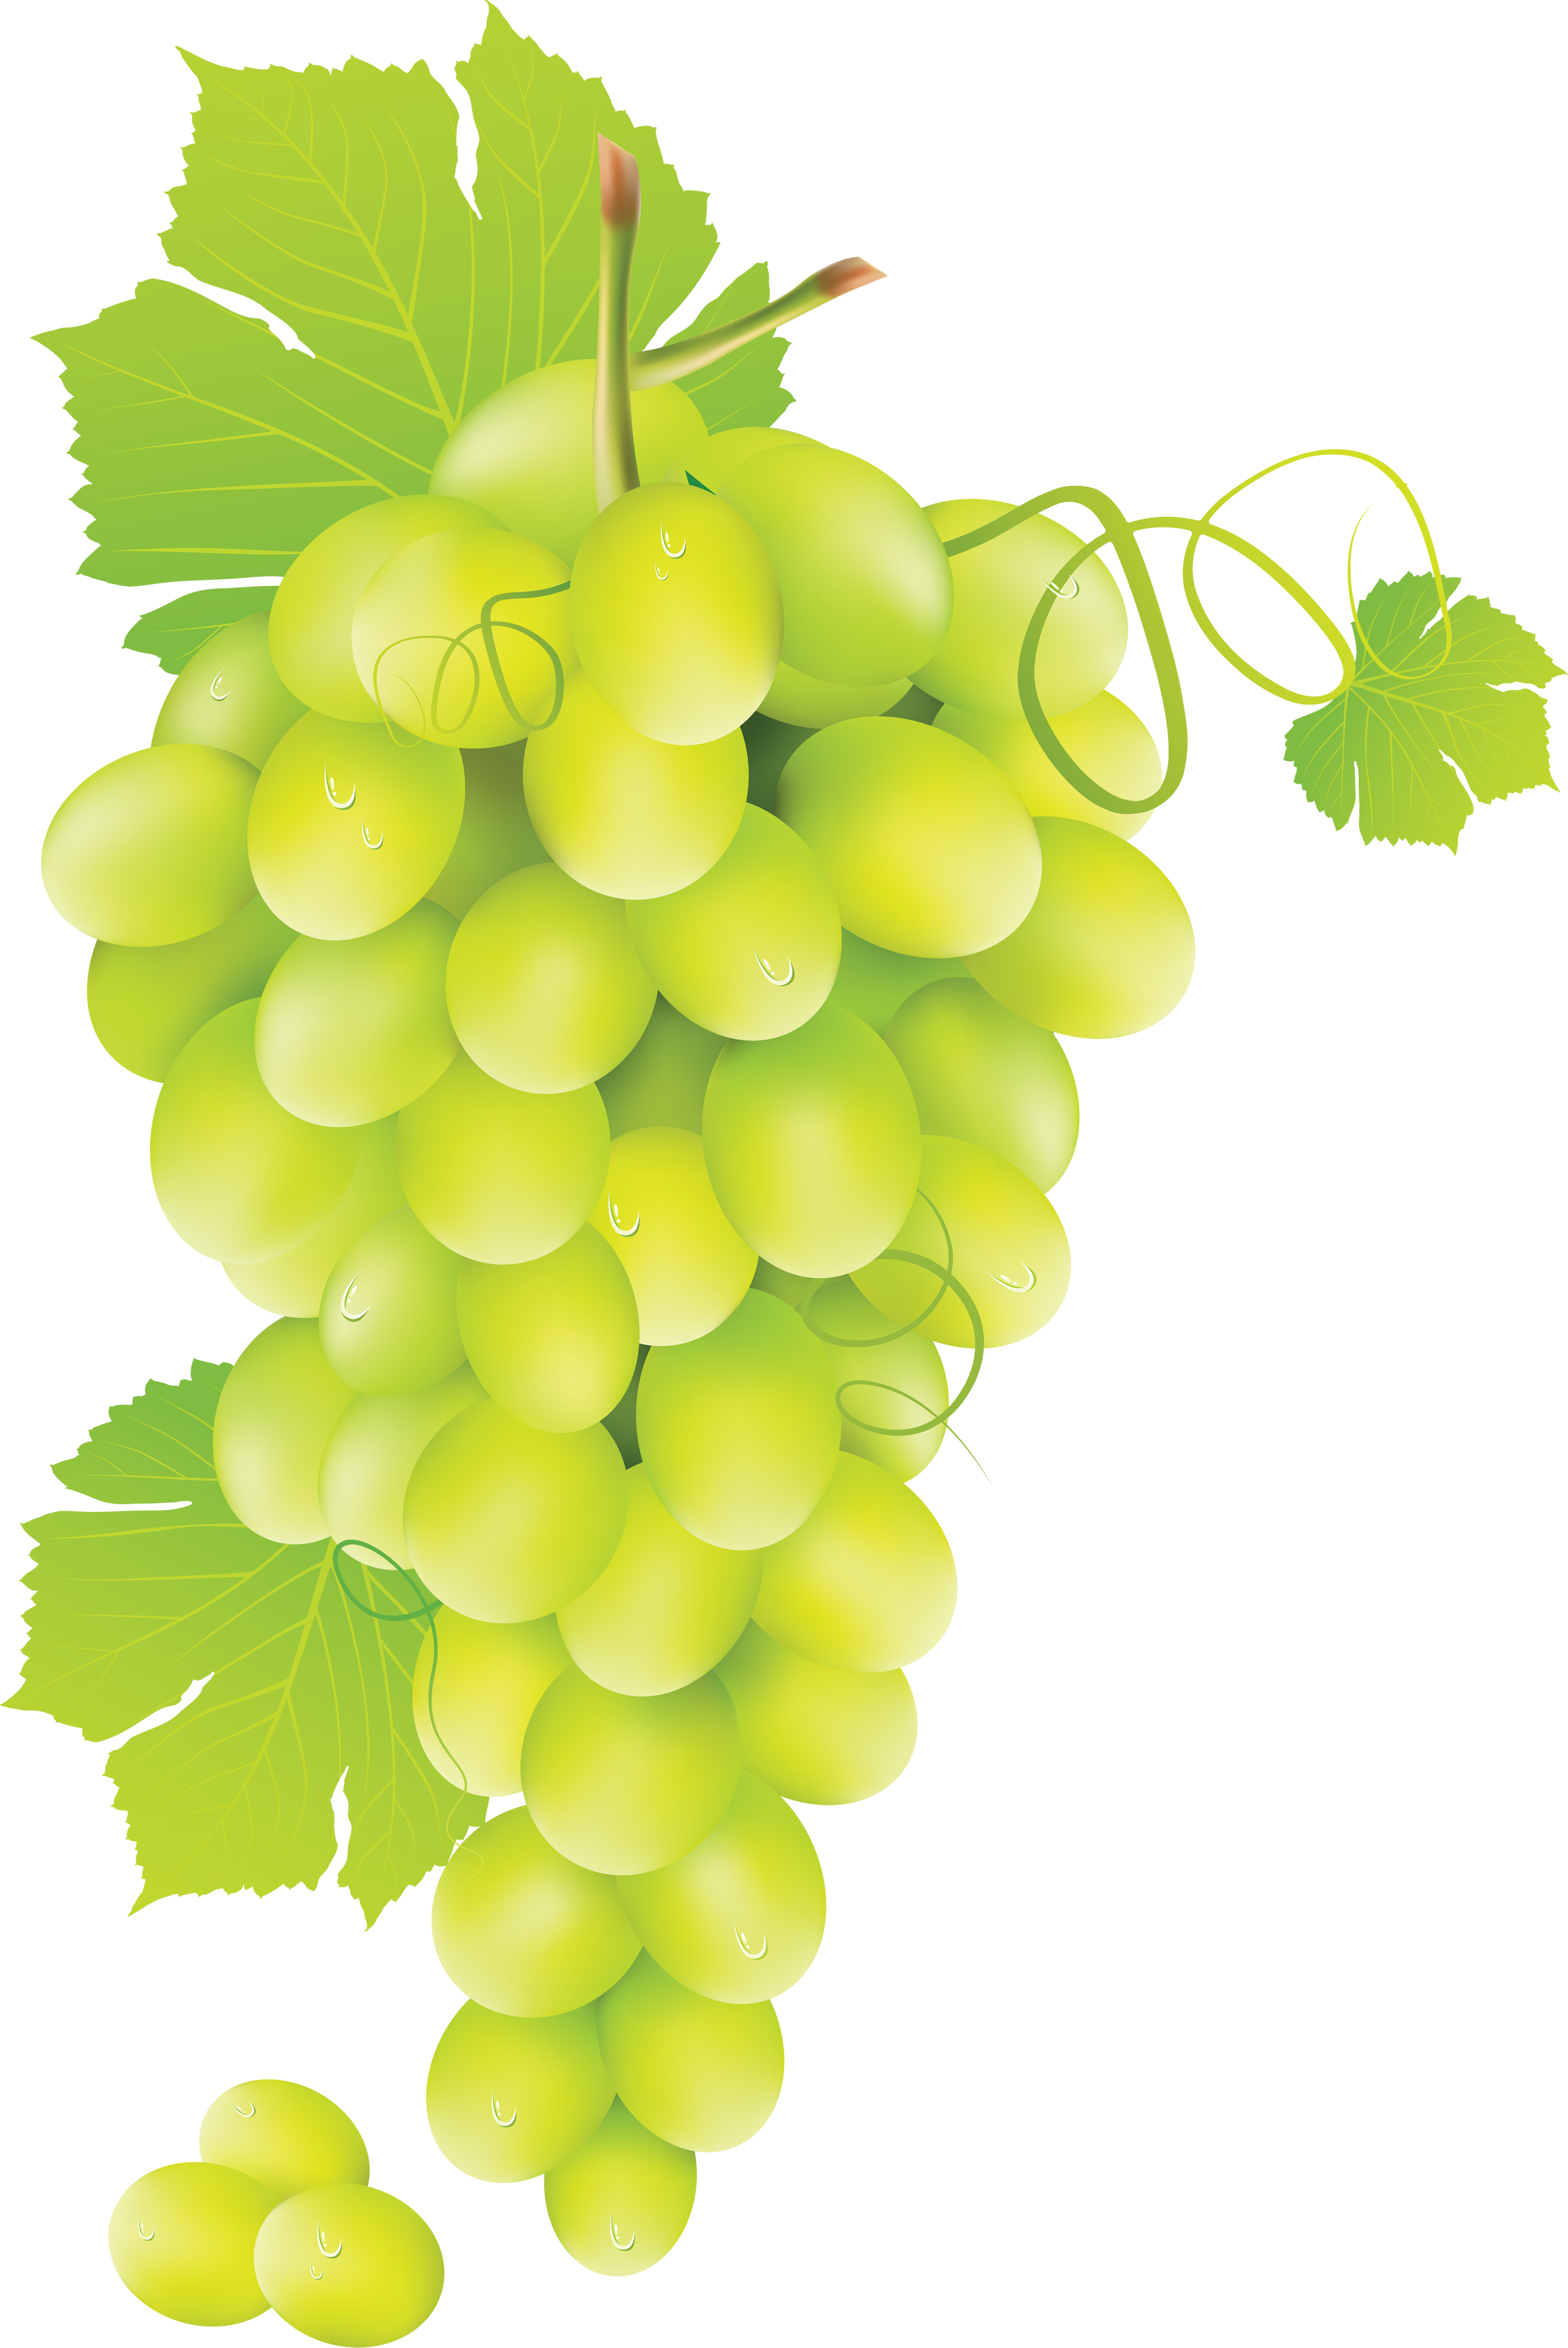 Red grape PNG image